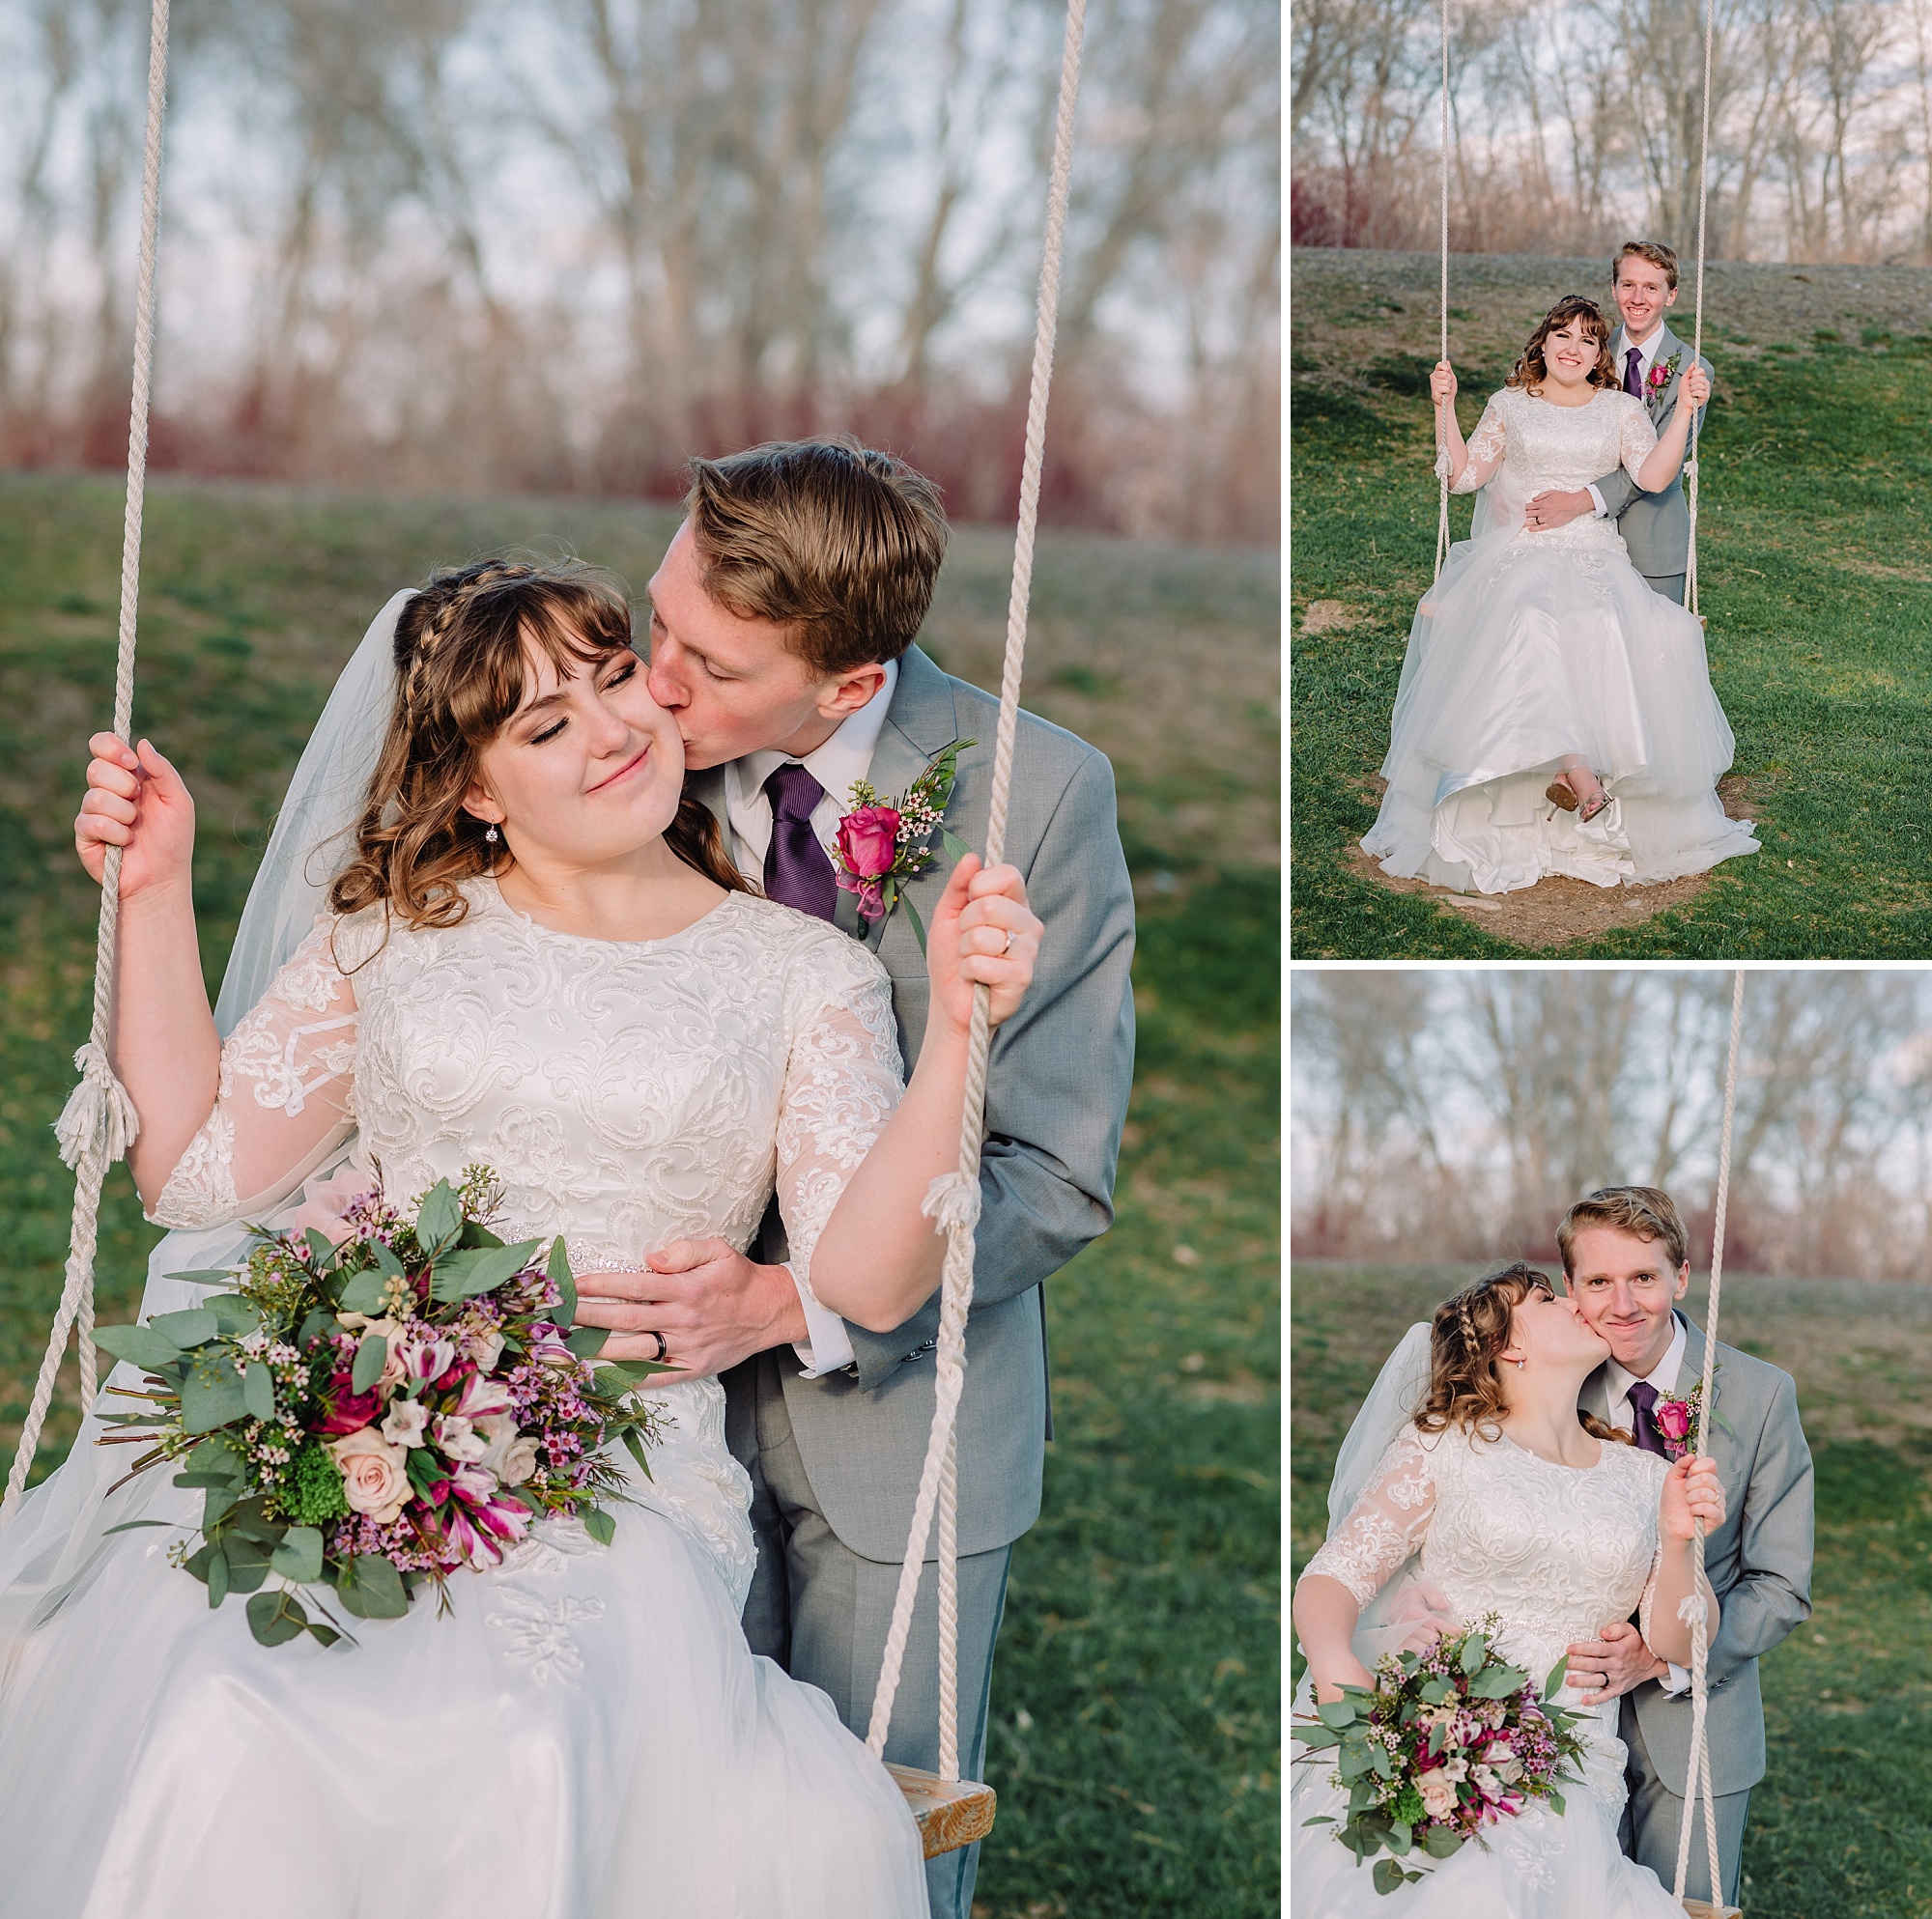 groom-and-bride-wedding-couple-on-swing-labelle-lake-bridals